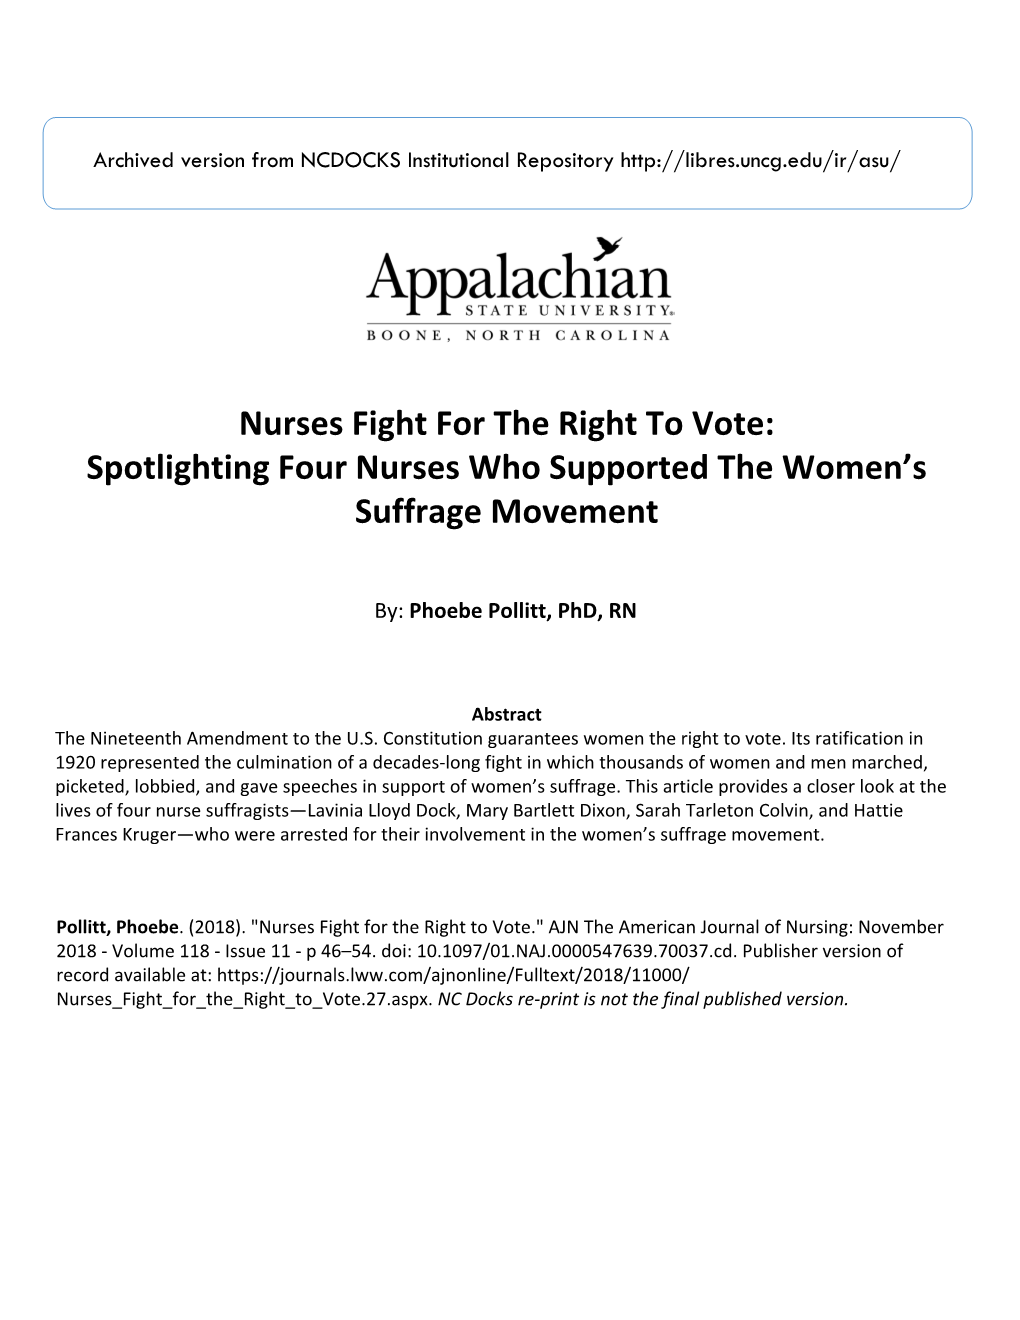 Nurses Fight for the Right to Vote: Spotlighting Four Nurses Who Supported the Women’S Suffrage Movement